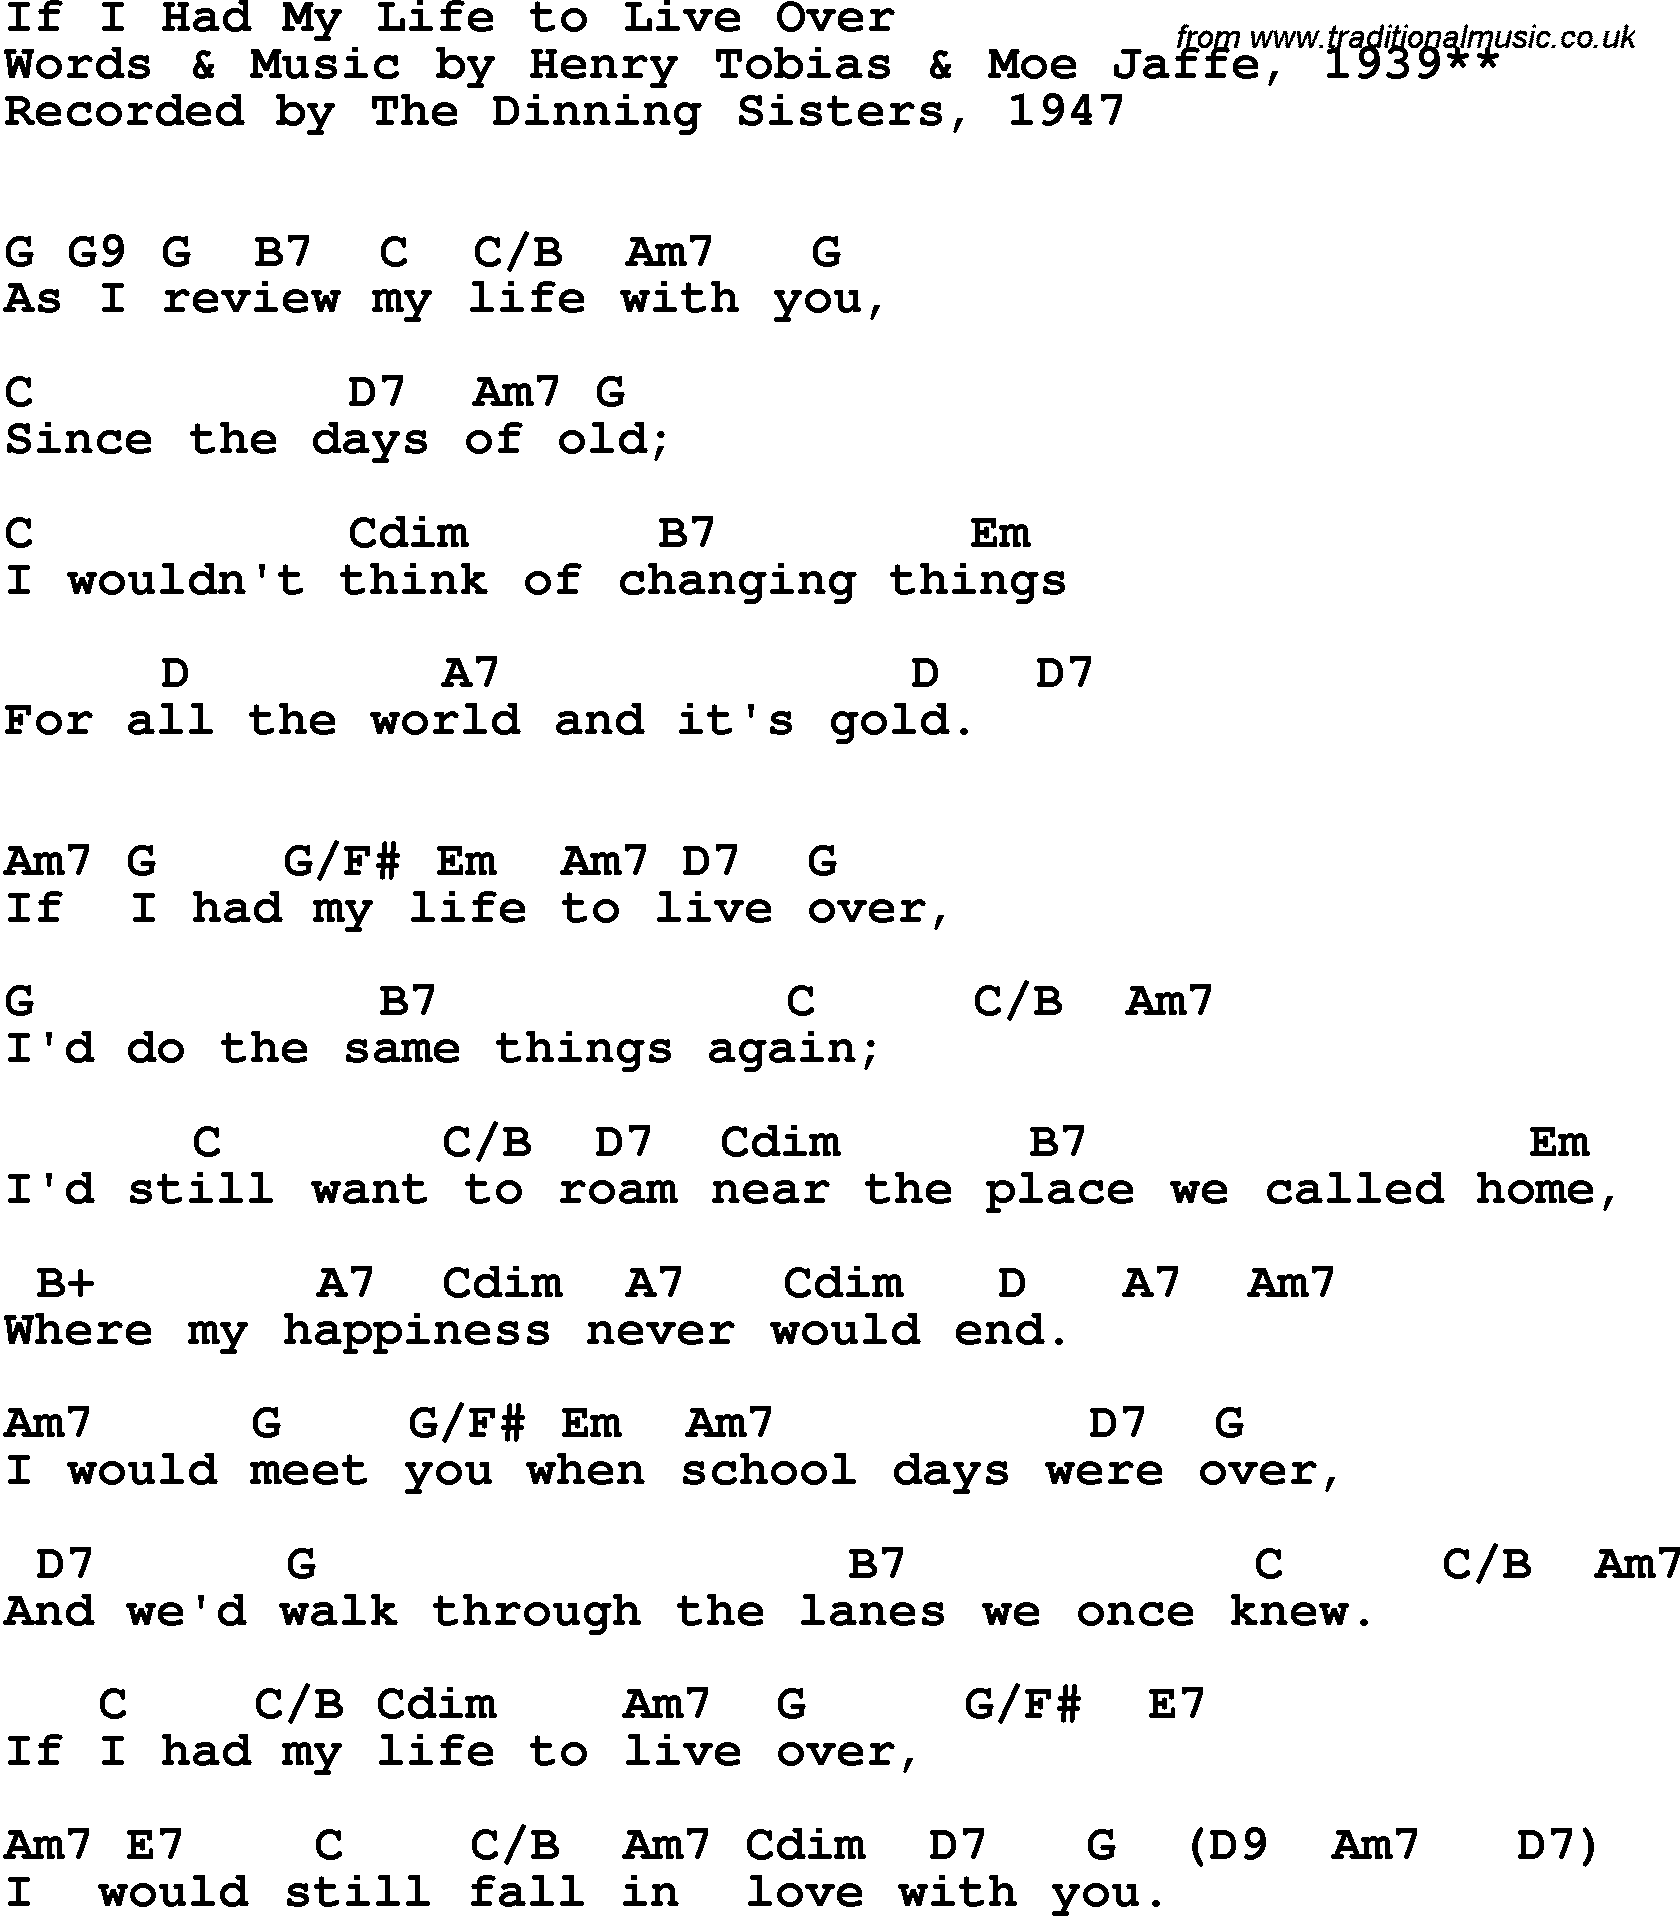 Song Lyrics with guitar chords for If I Had My Life To Live Over - Dinning Sisters, 1947